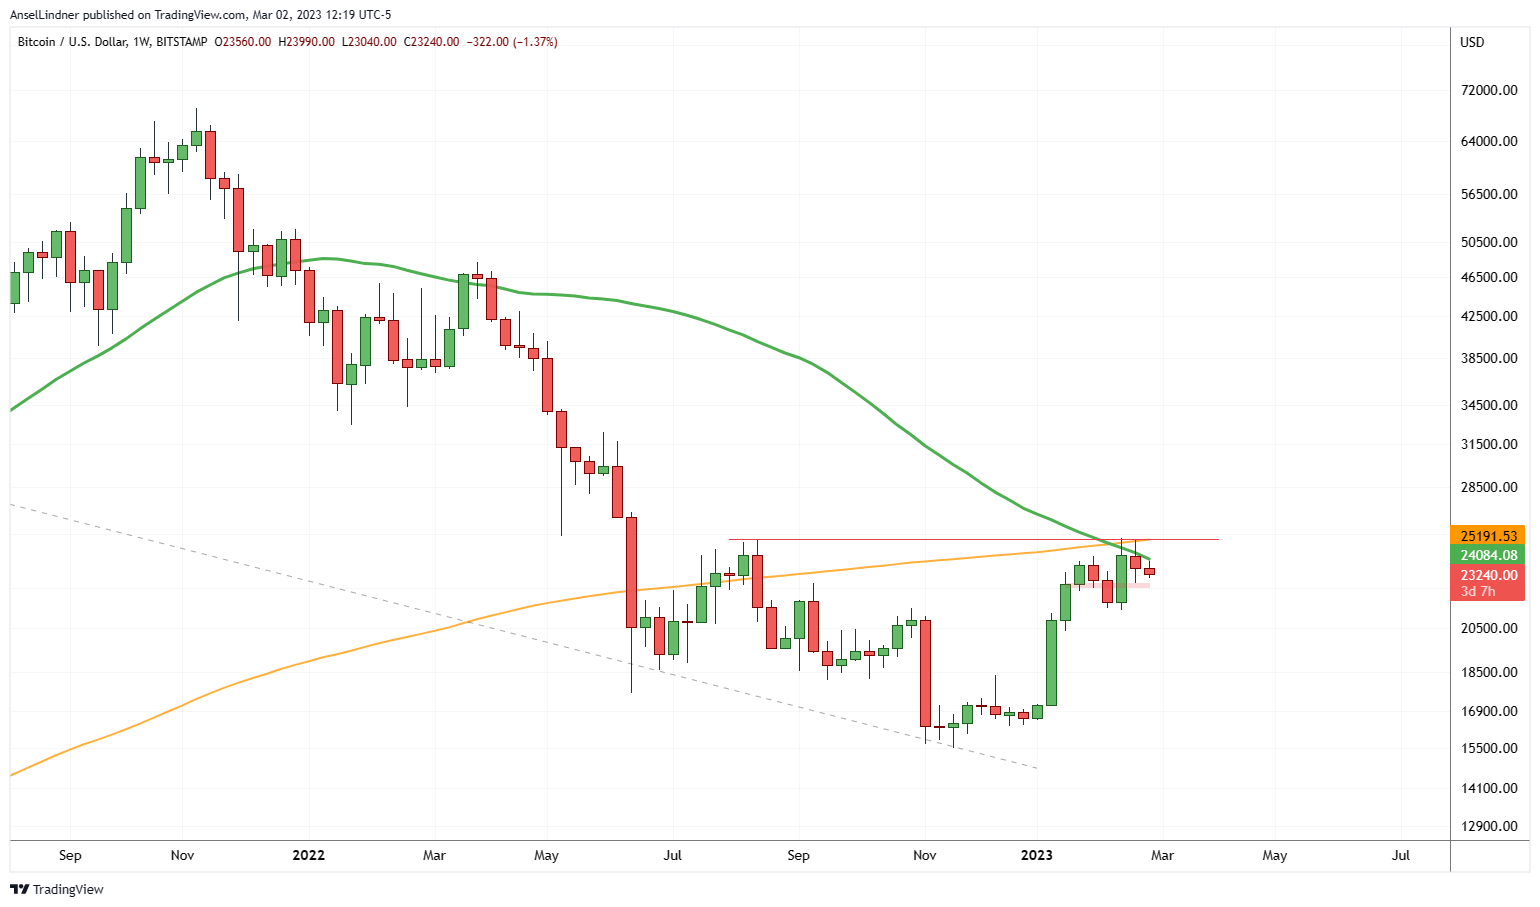 Bitcoin weekly chart with 50 and 200-period moving averages